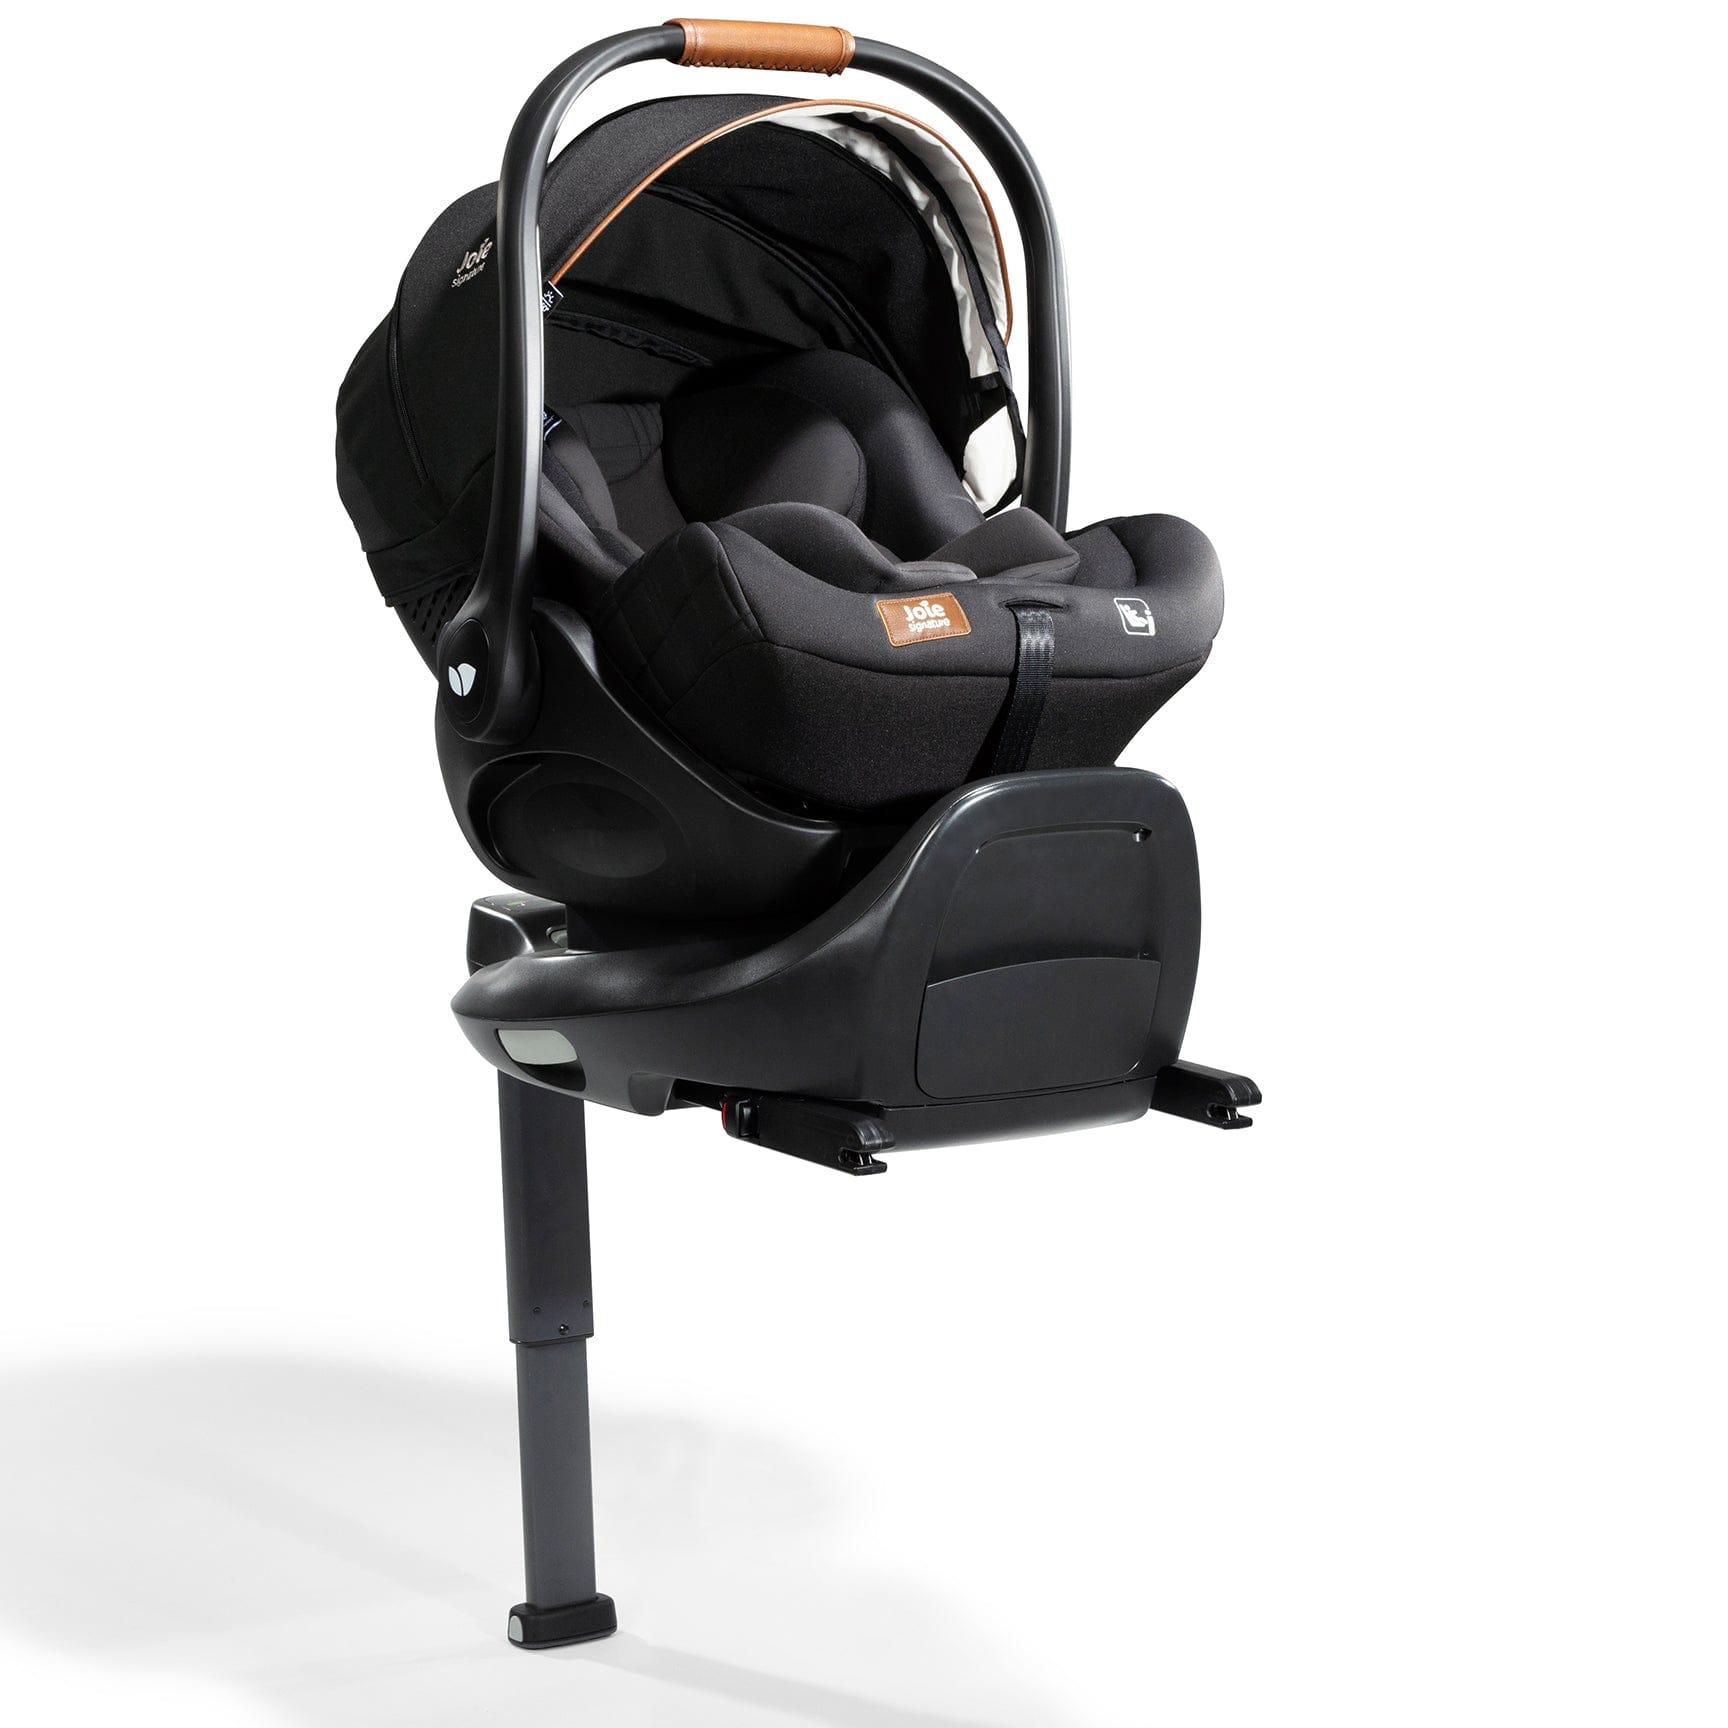 Joie i-Level Recline Signature Car Seat & i-Base Encore in Eclipse Baby Car Seats 12224-ECL